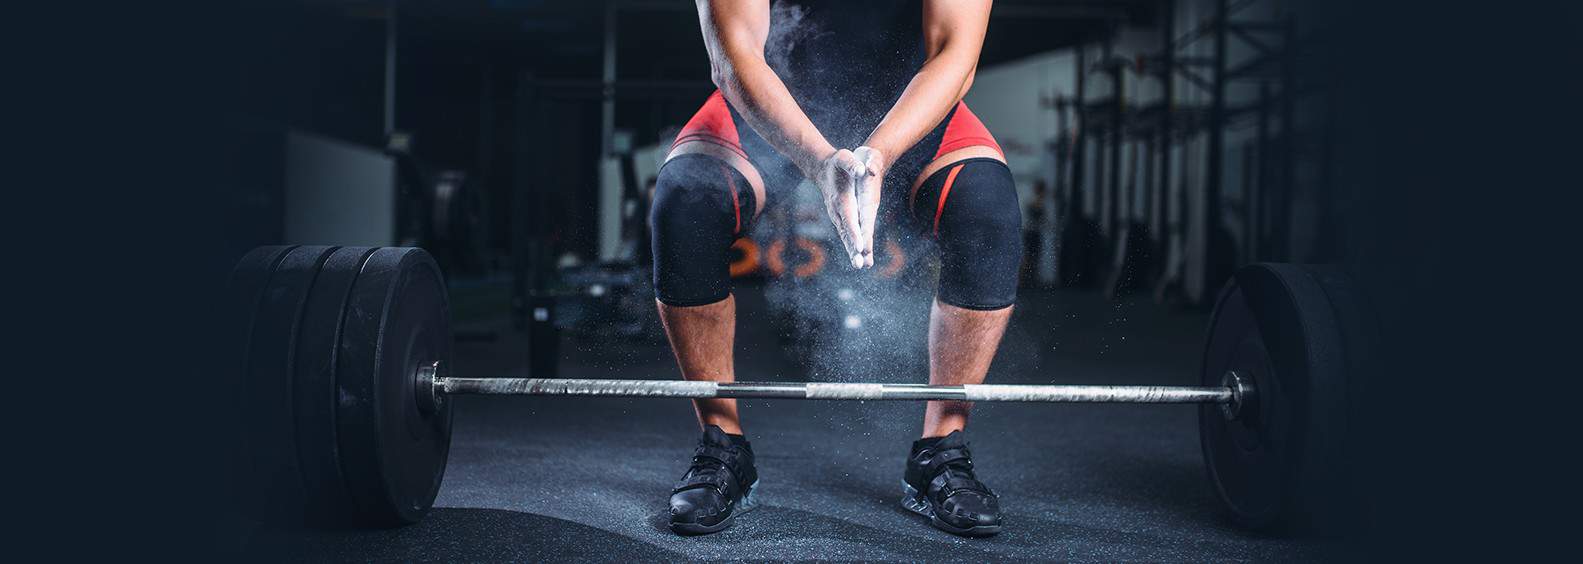 Powerlifting: The Beginner's Guide For An Average Man